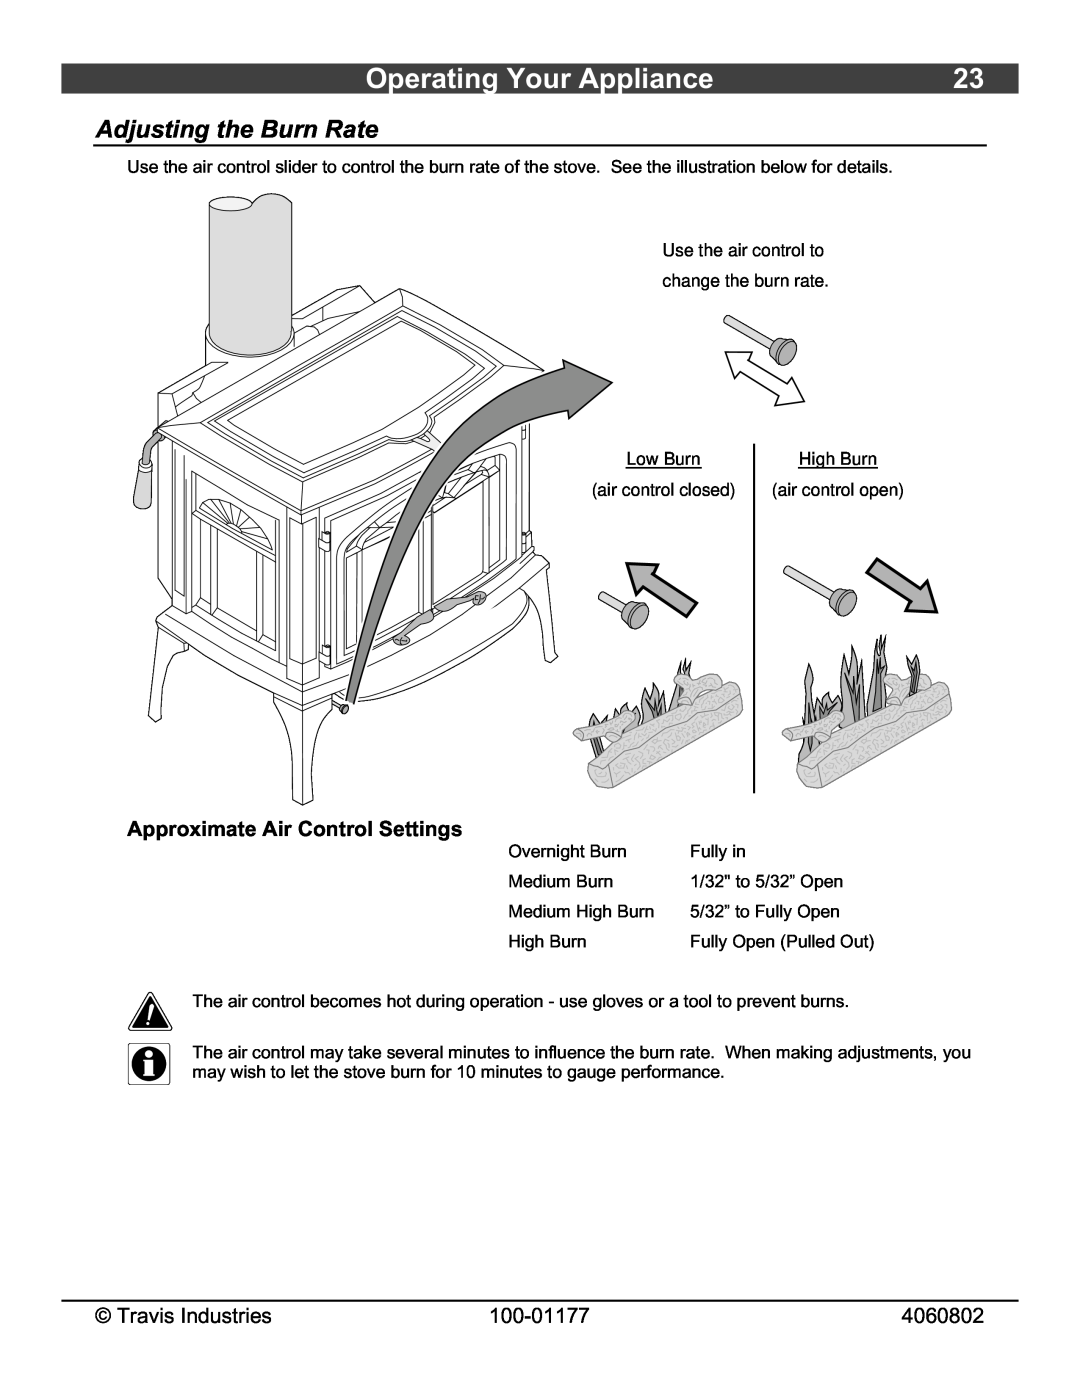 Lopi Leyden Wood Stove owner manual Operating Your Appliance, Adjusting the Burn Rate, Approximate Air Control Settings 